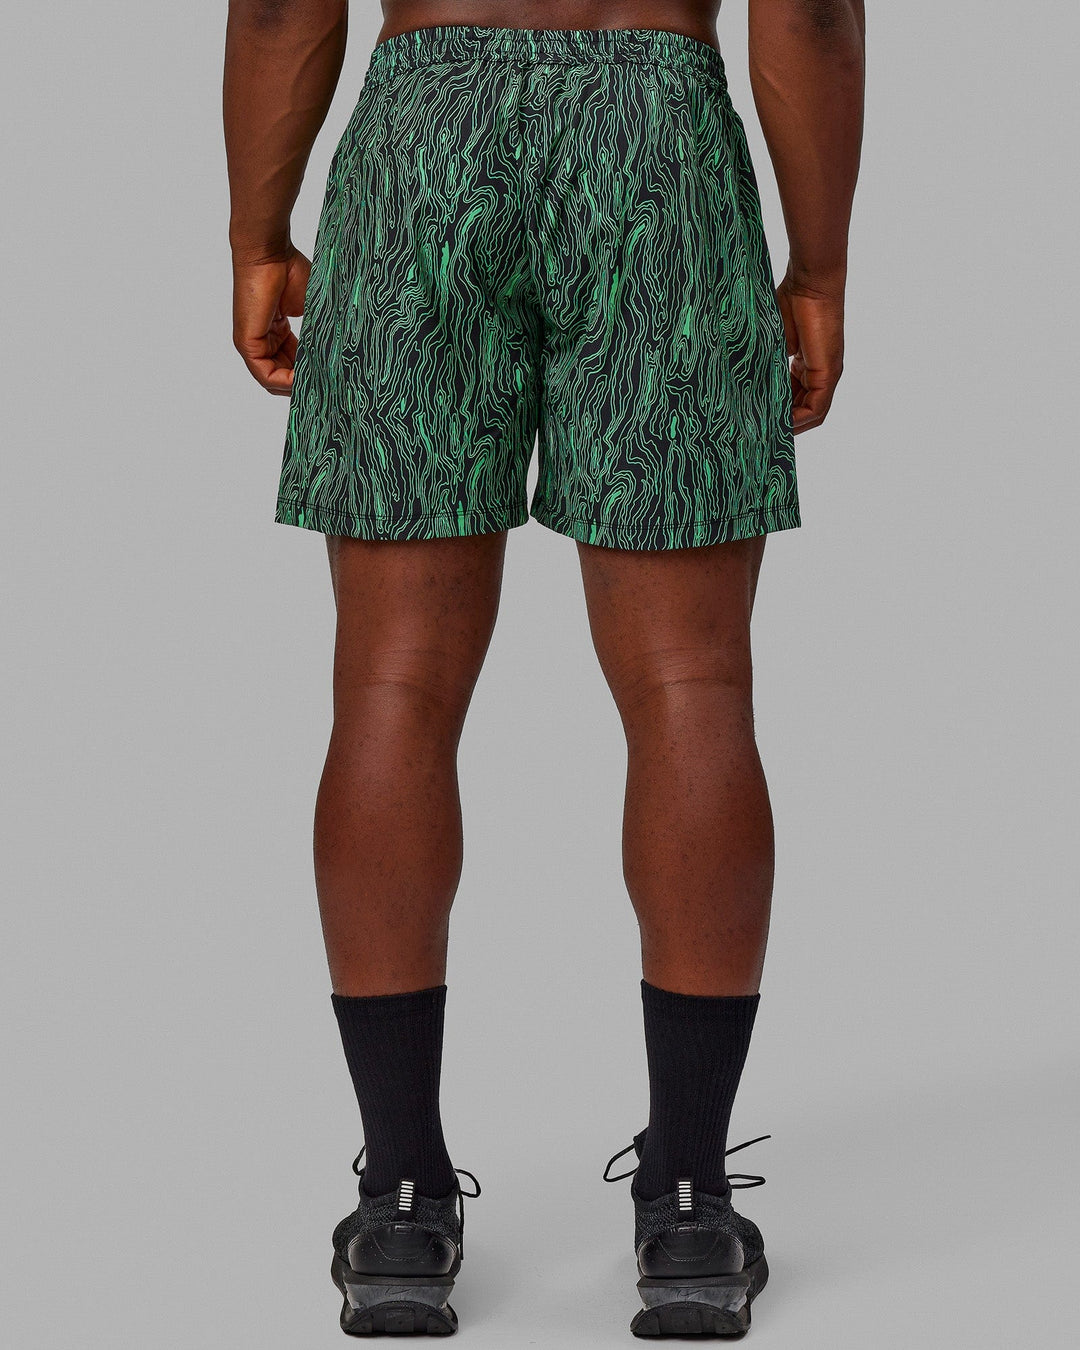 Man wearing Rep 5" Performance Shorts - Topographic Black-Lime